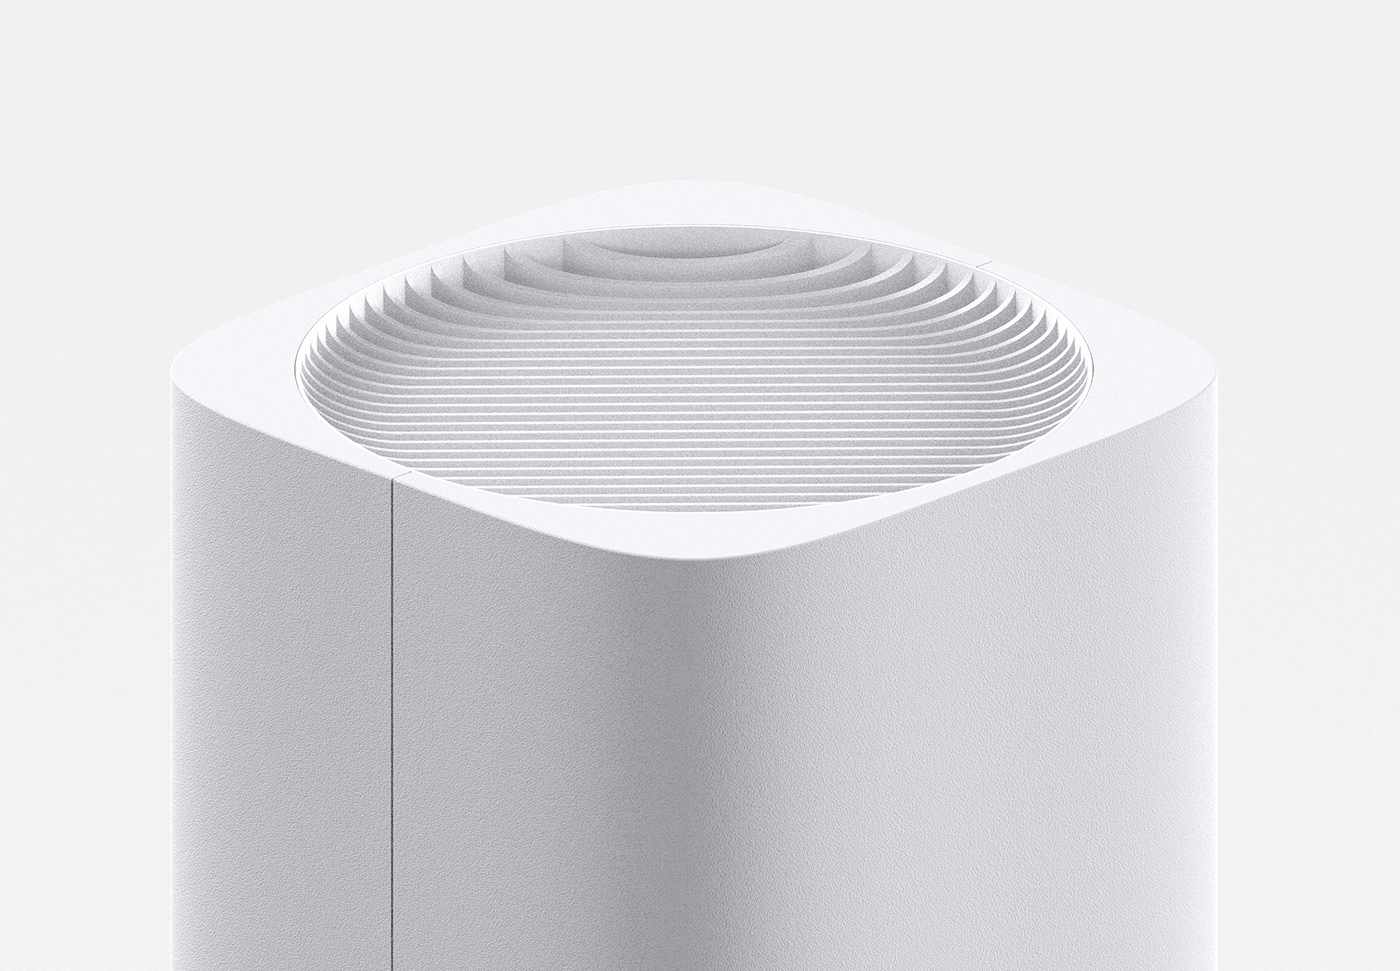 air purifier consumer electronics smart device art object Internet of Things UI/UX app